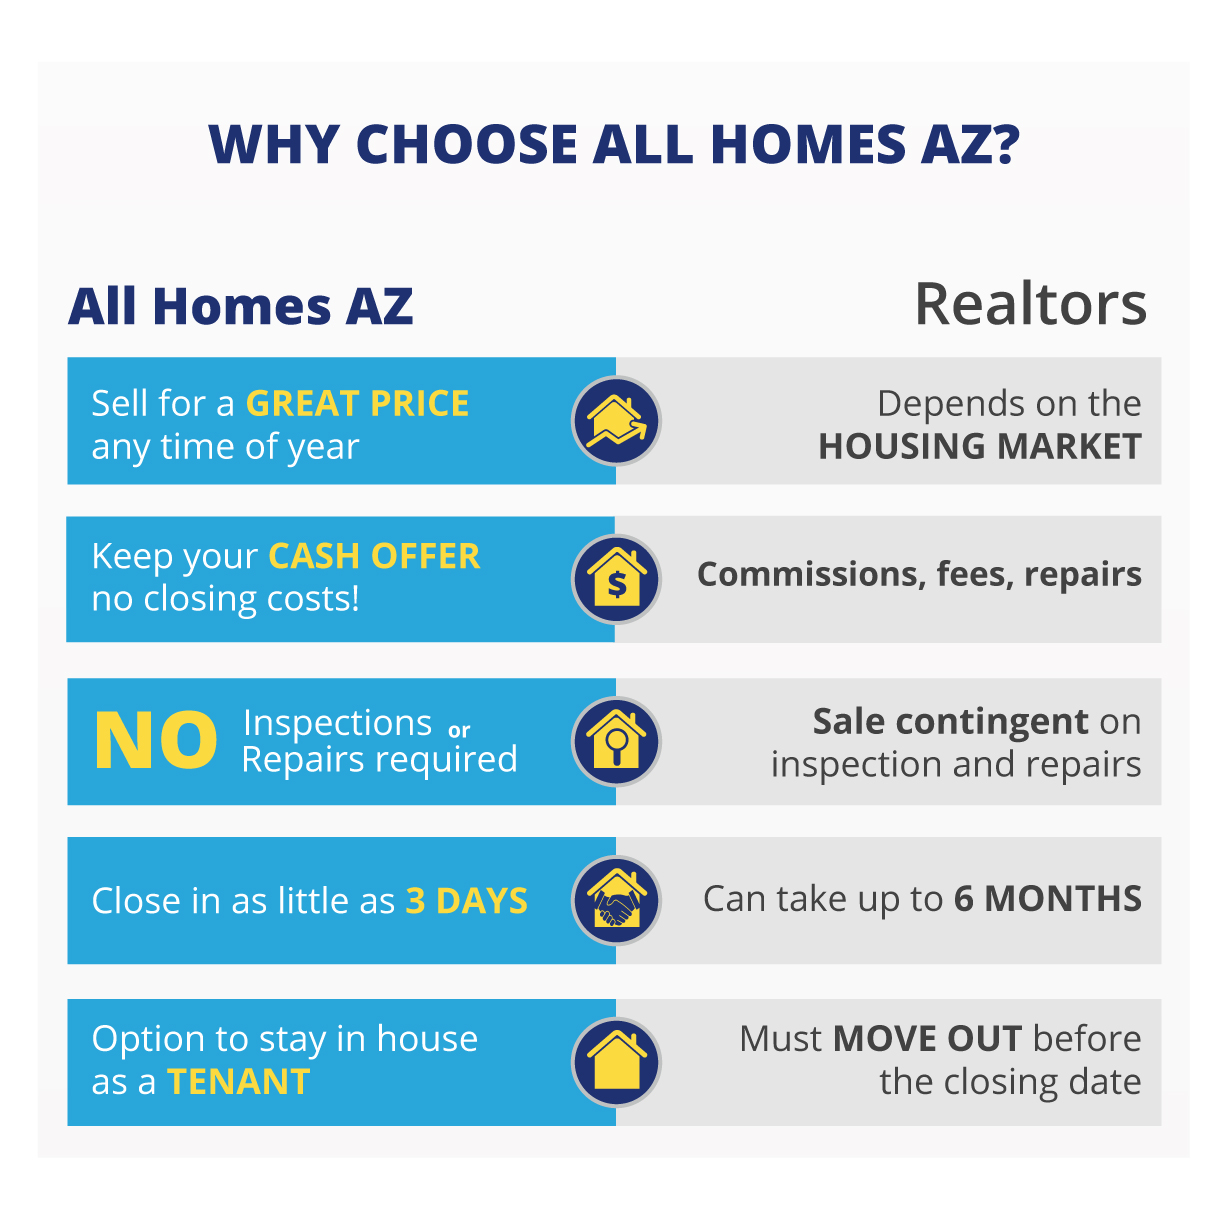 All Homes AZ offers more benefits than professional home buyers